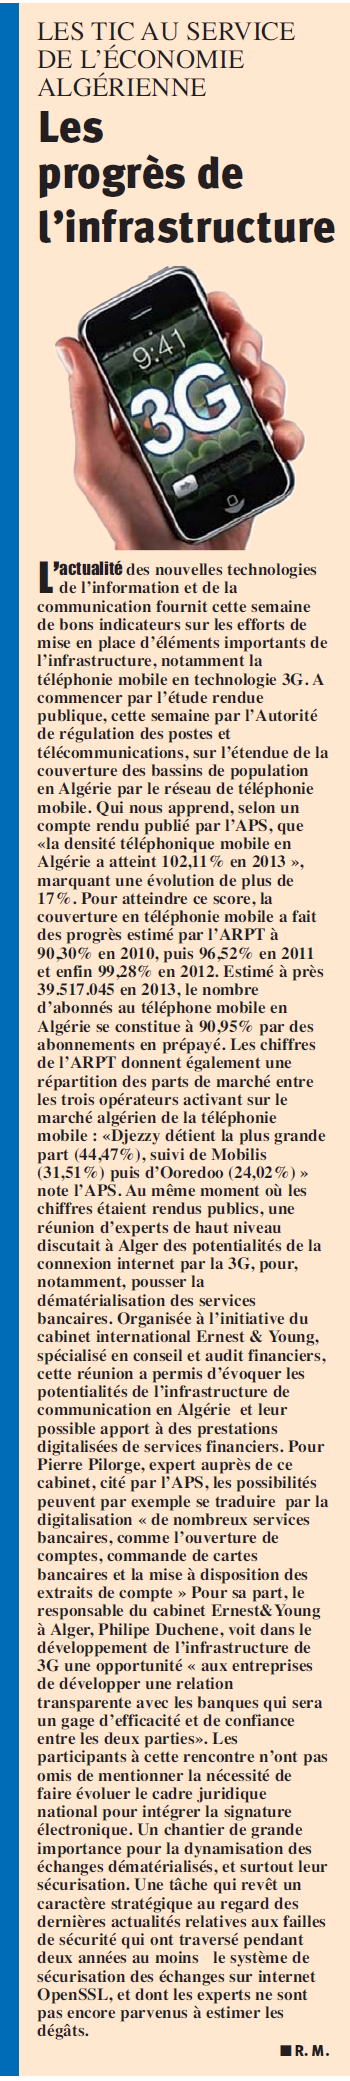 ICT for the Algerian economy: The progress of the infrastructure HORIZONS P16 Djezzy has the largest